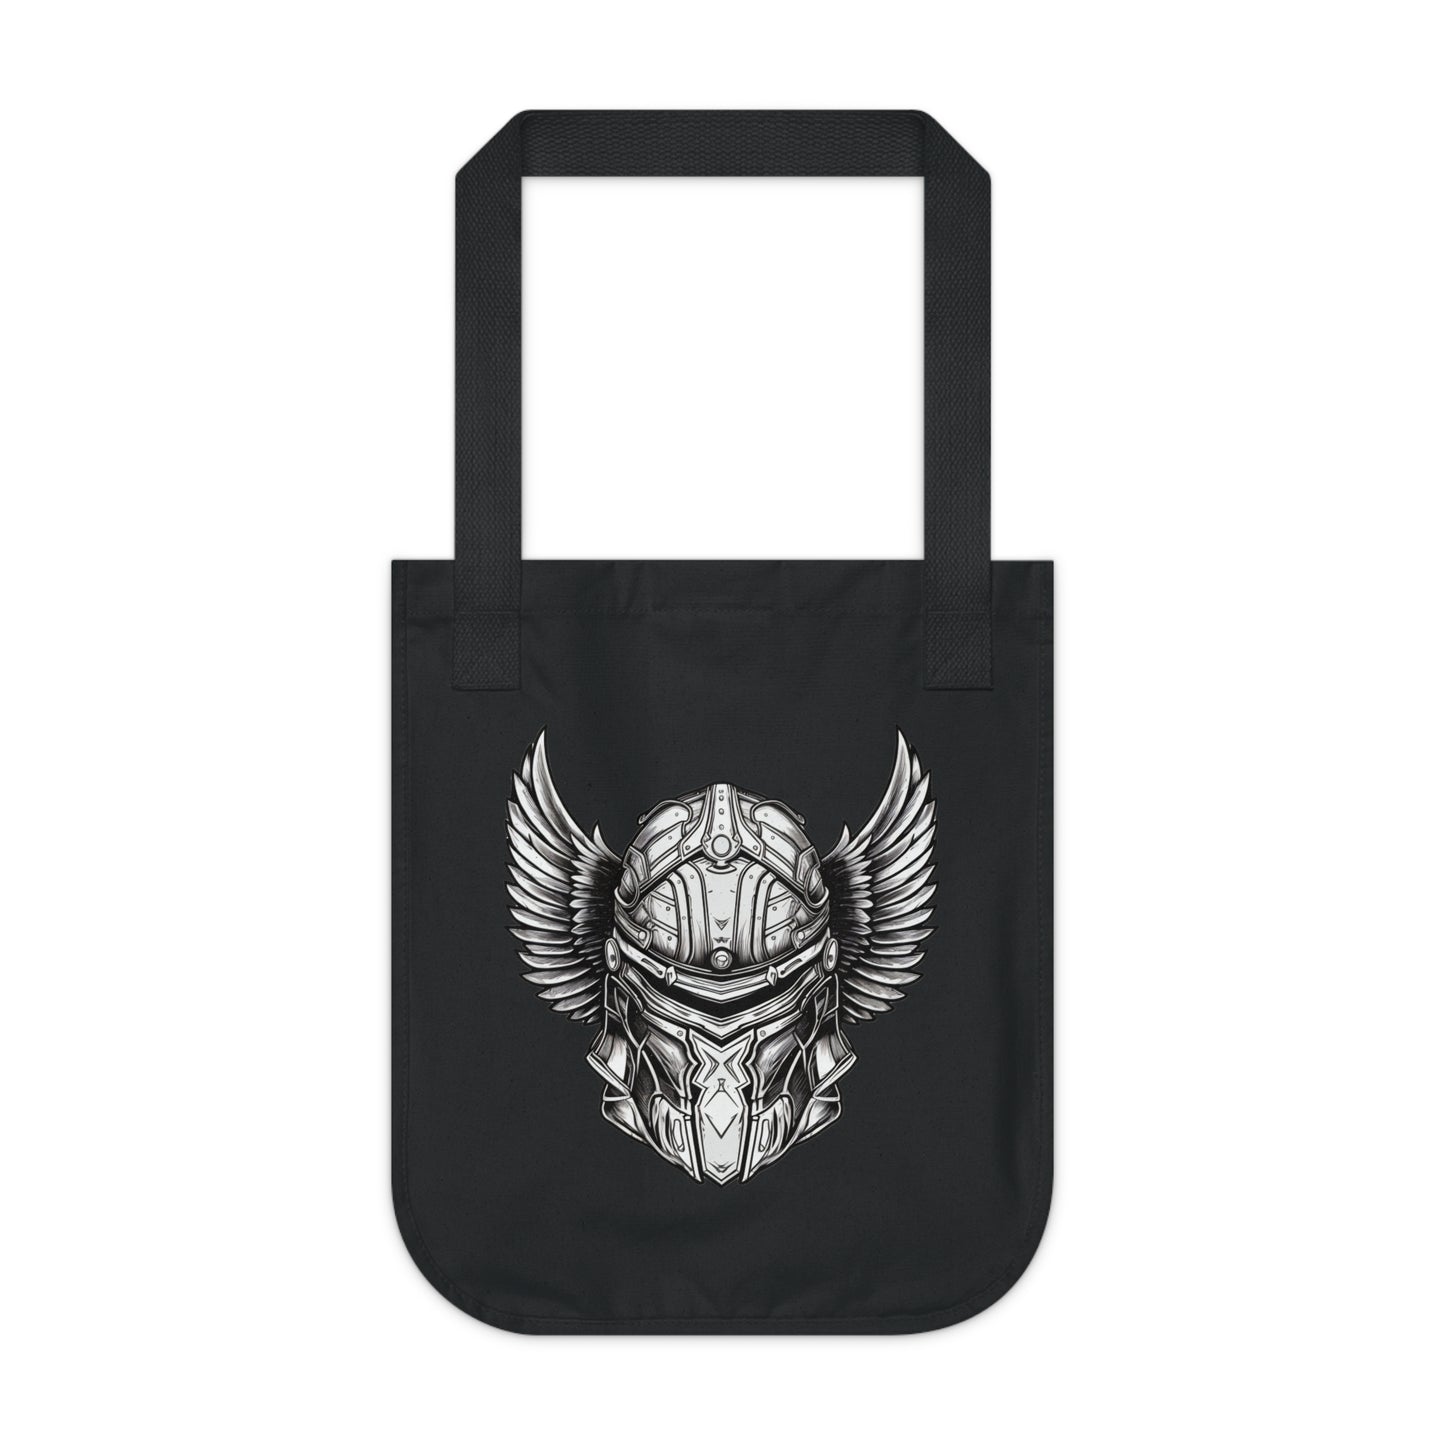 Winged Paladin Helmet Organic Canvas Tote Bag, D&D Tote, DnD Bag of Holding, Eco-friendly Tote, Double-Sided Print